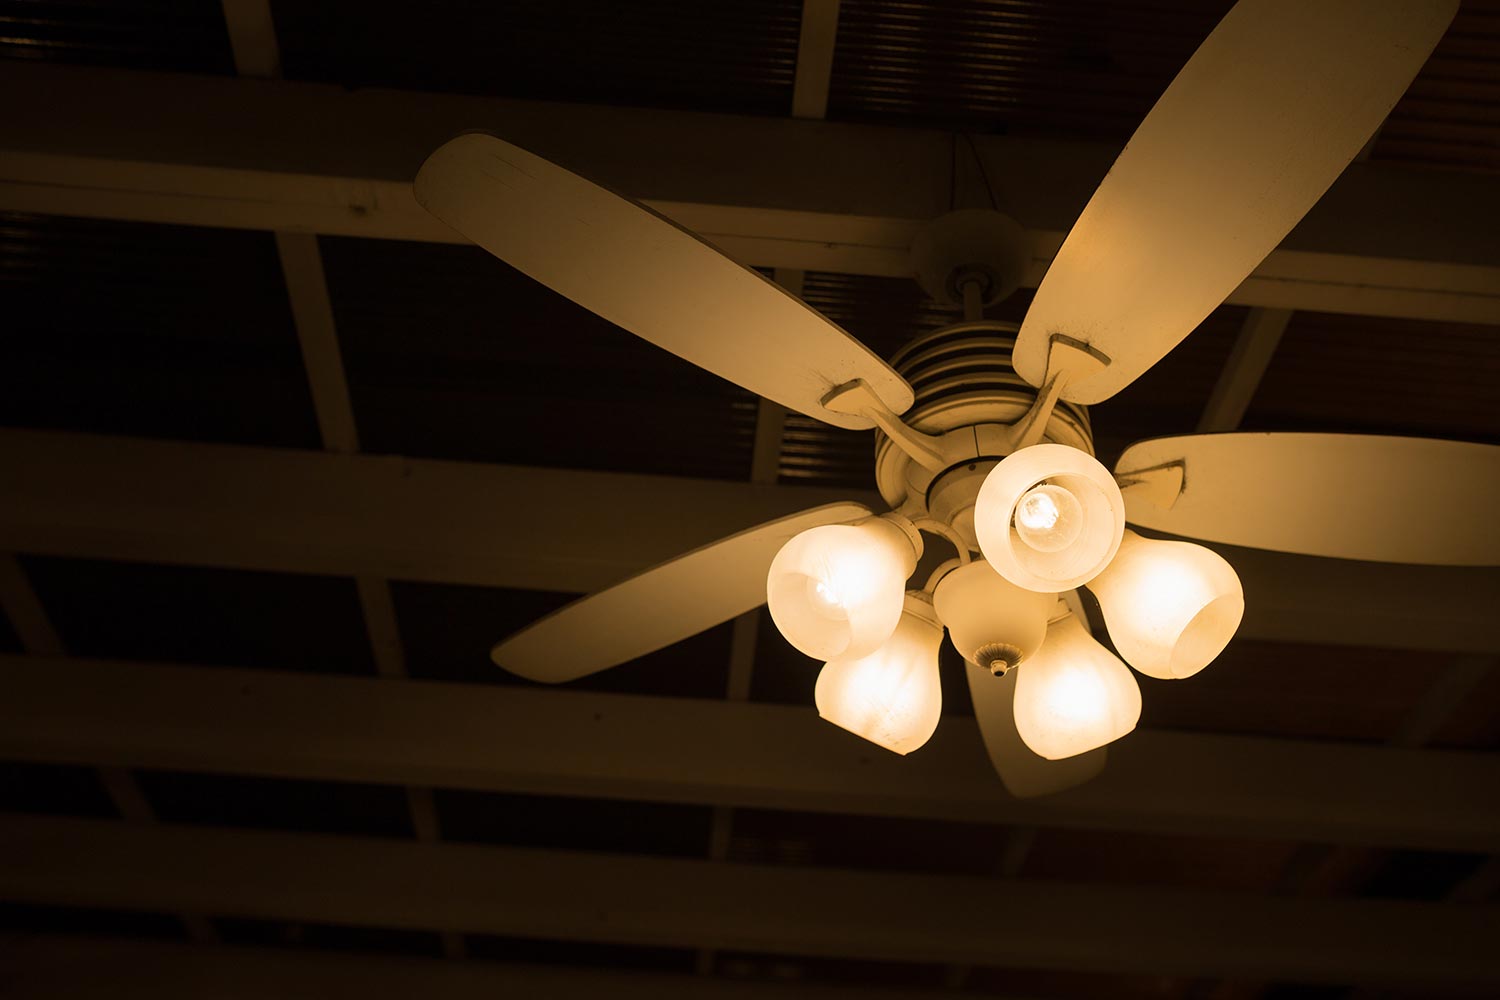 Ceiling lamp and fan